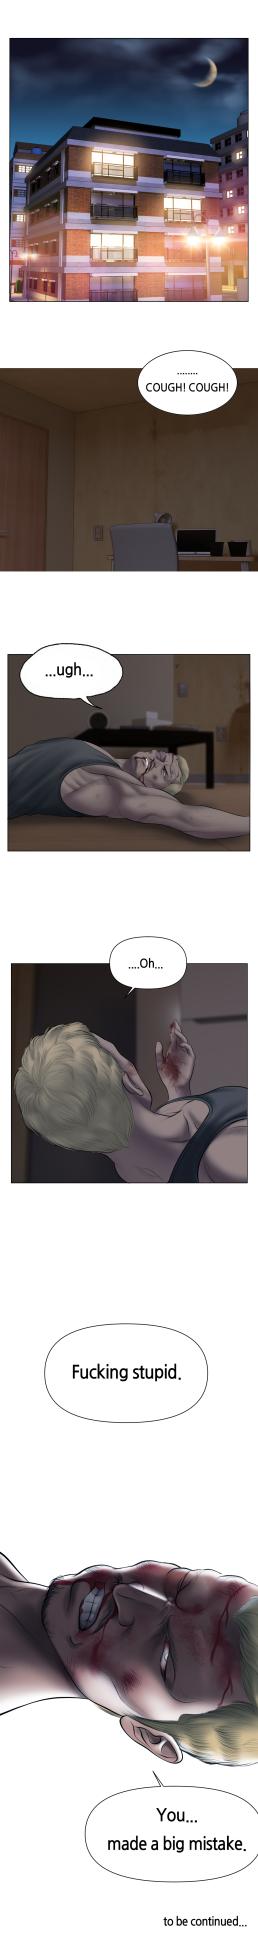 [Dr. Stein] Smoking Hypnosis [1-10] - Page 27